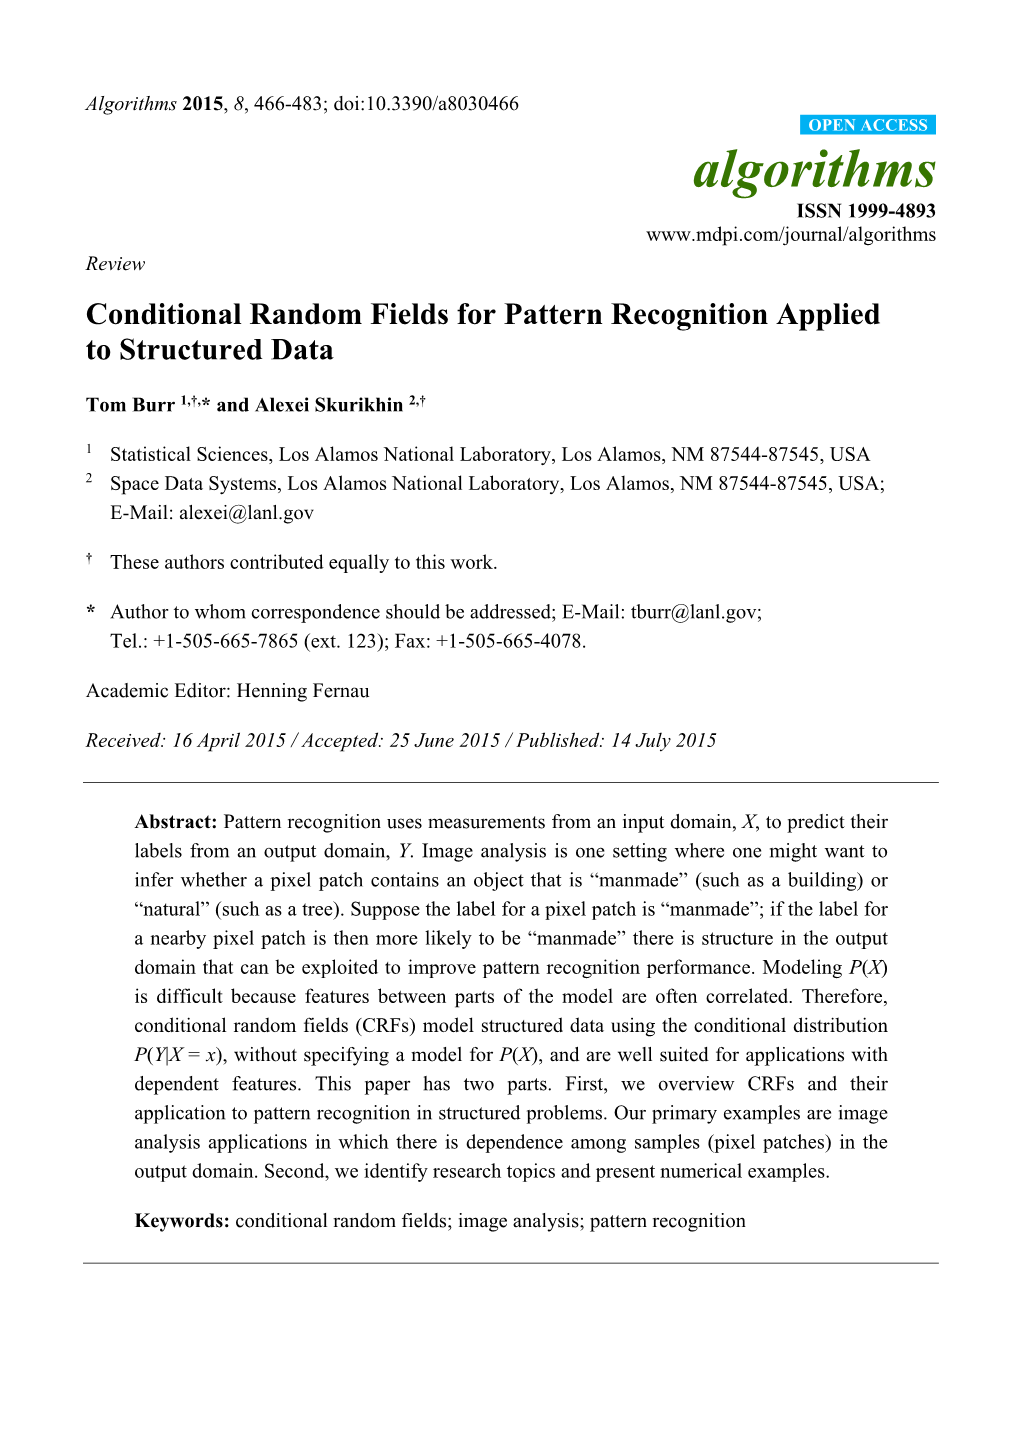 Conditional Random Fields for Pattern Recognition Applied to Structured Data